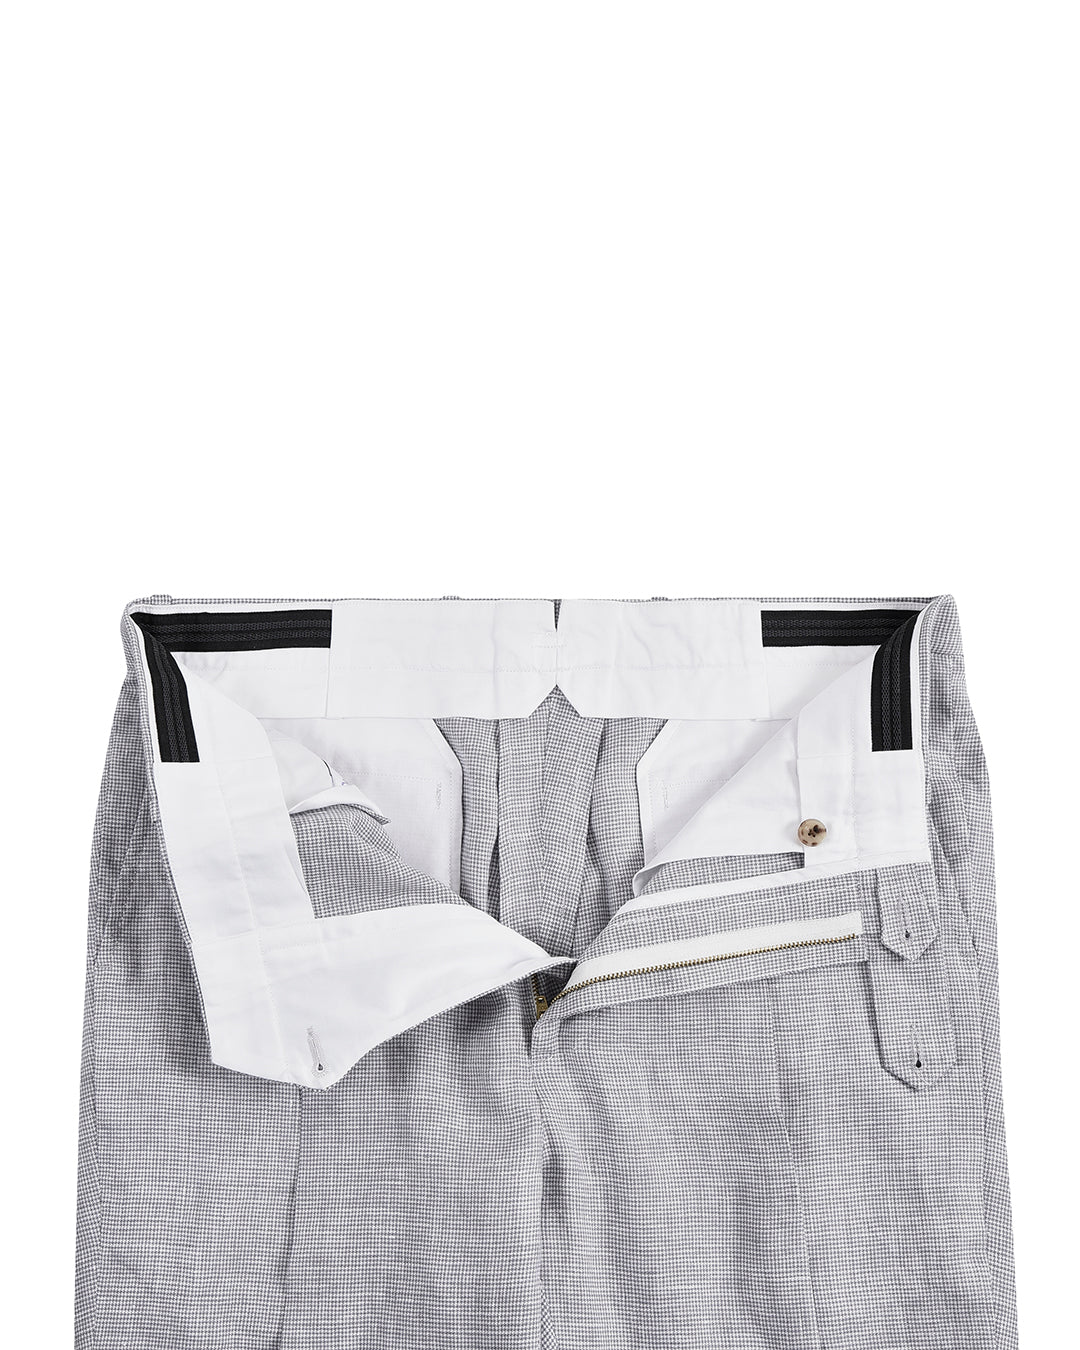 Front open view of custom linen pants for men by Luxire in grey houndstooth